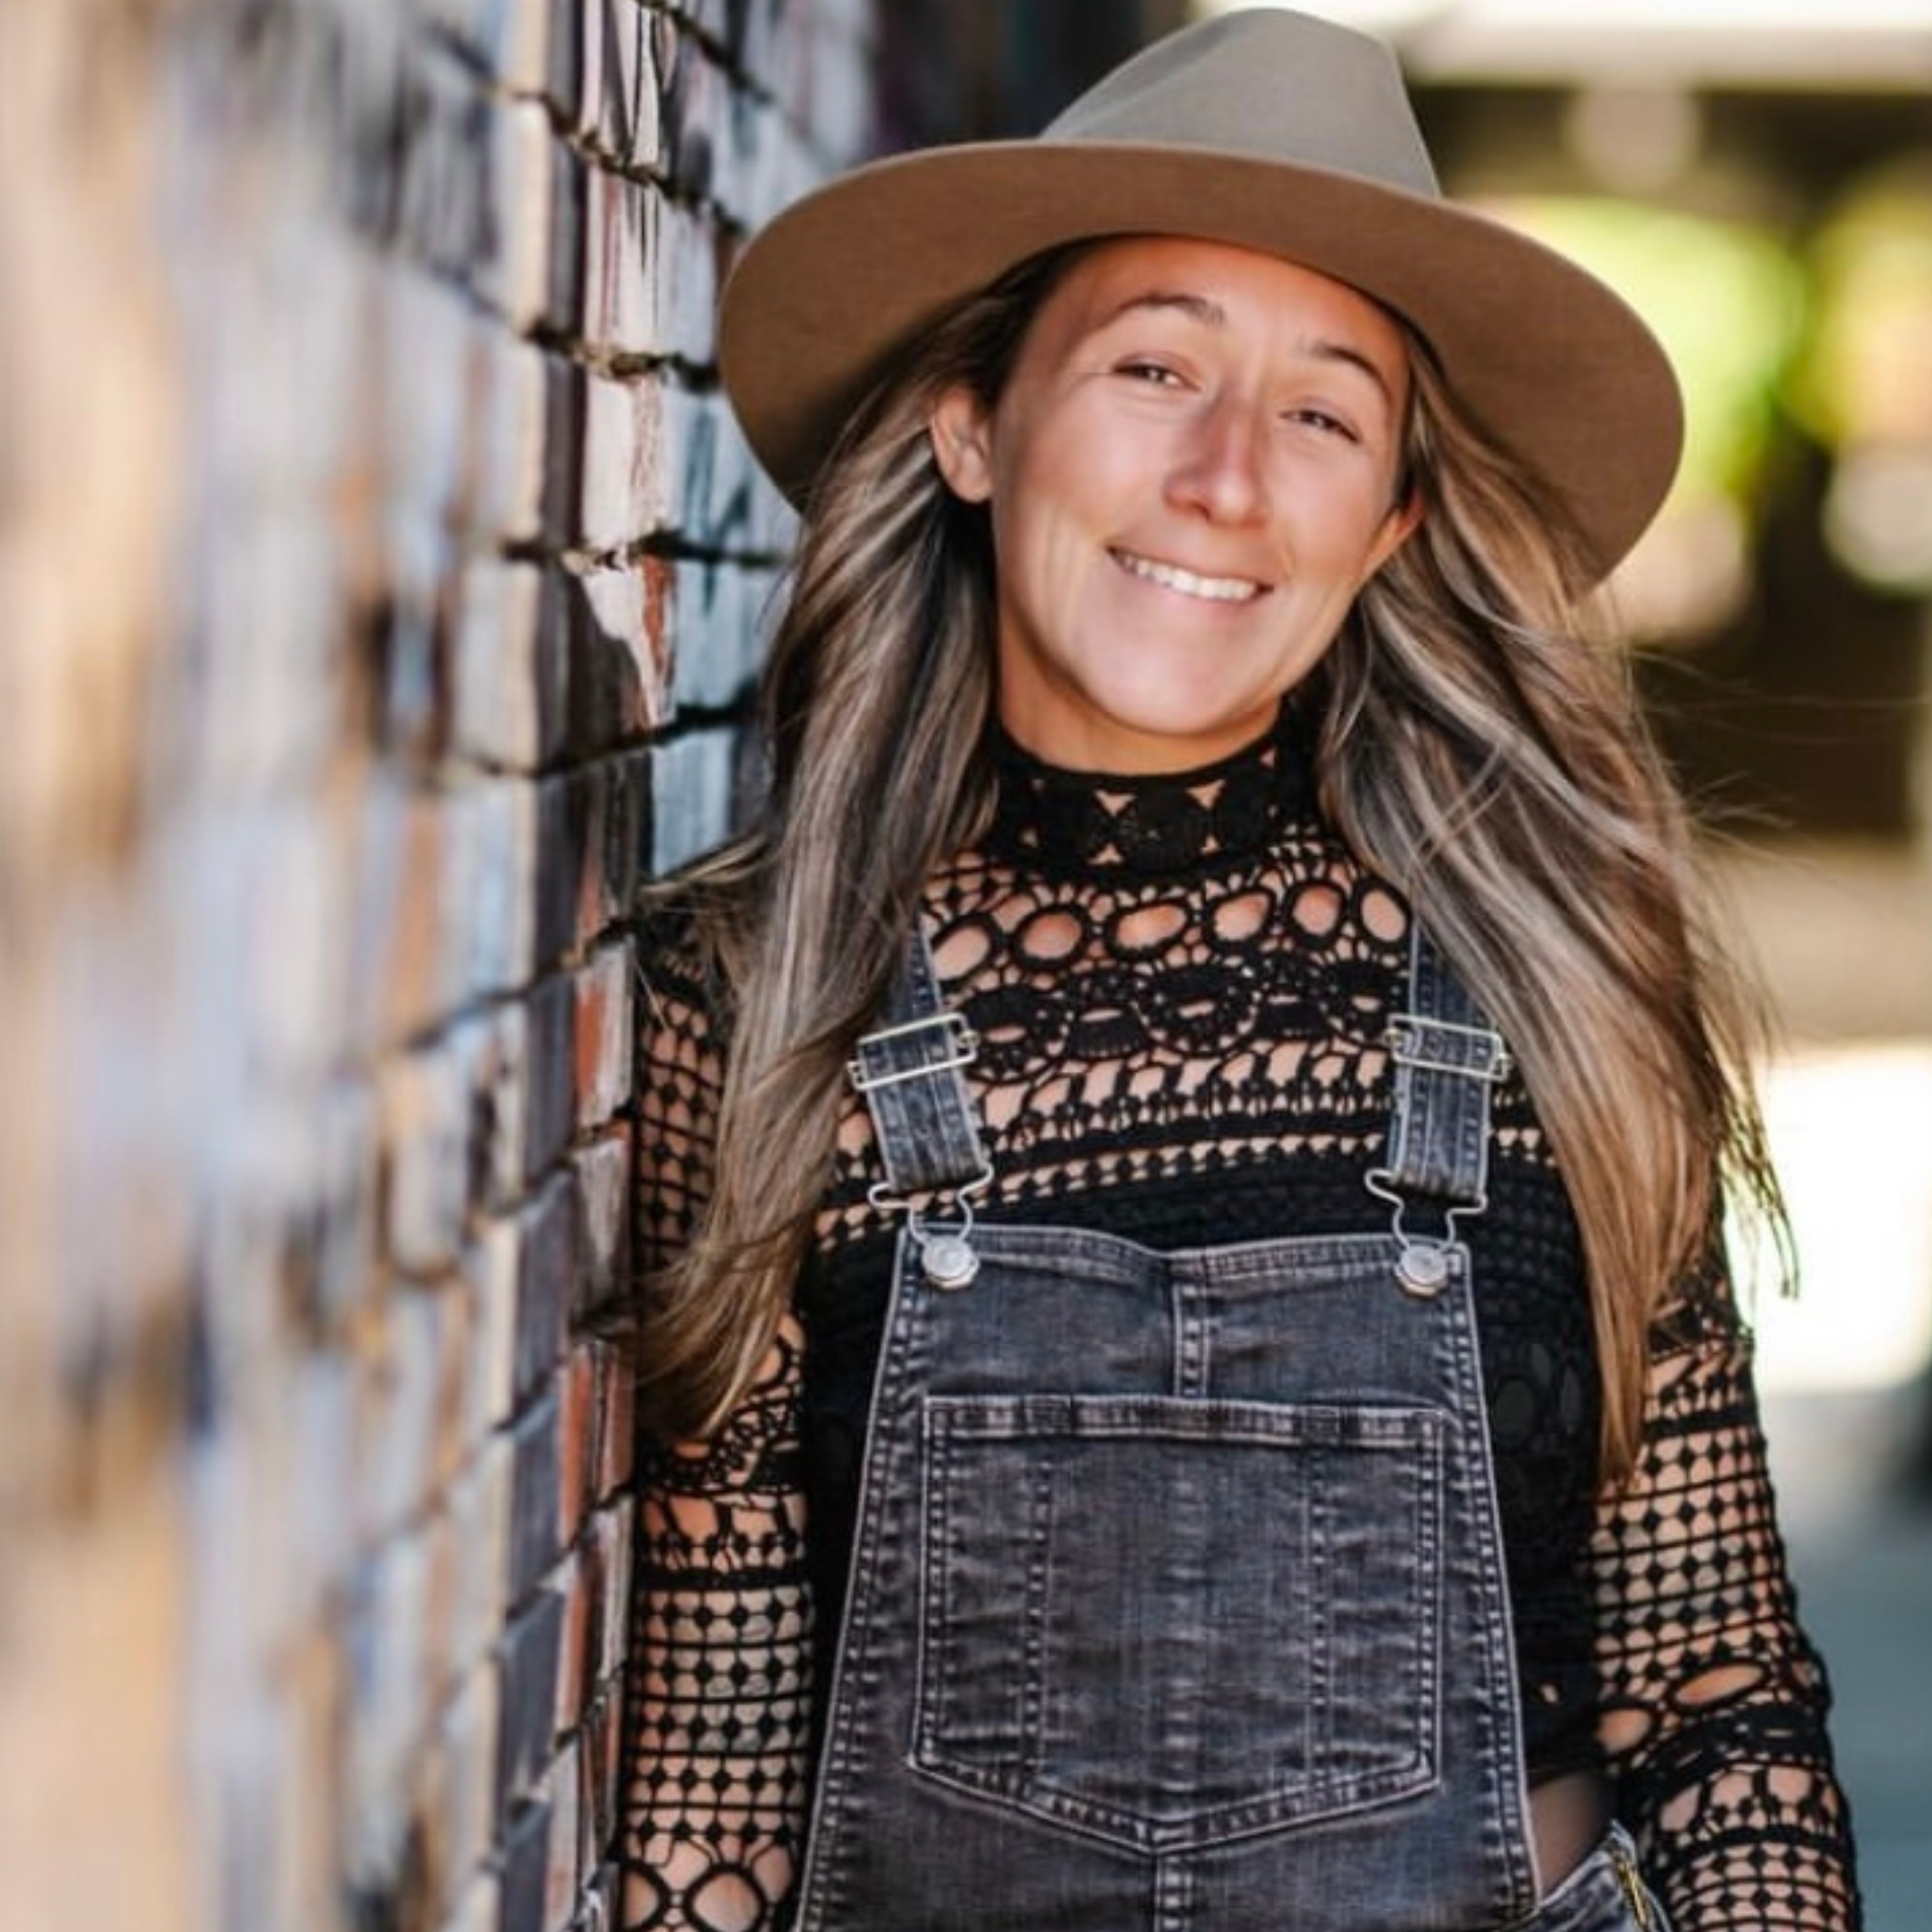 Brinn Flagg, a white women with blonde hair leans on a wooden wall.  Wearing a tan wide brimmed hat, denim overalls, and a dark patterned long sleeve shirt. 